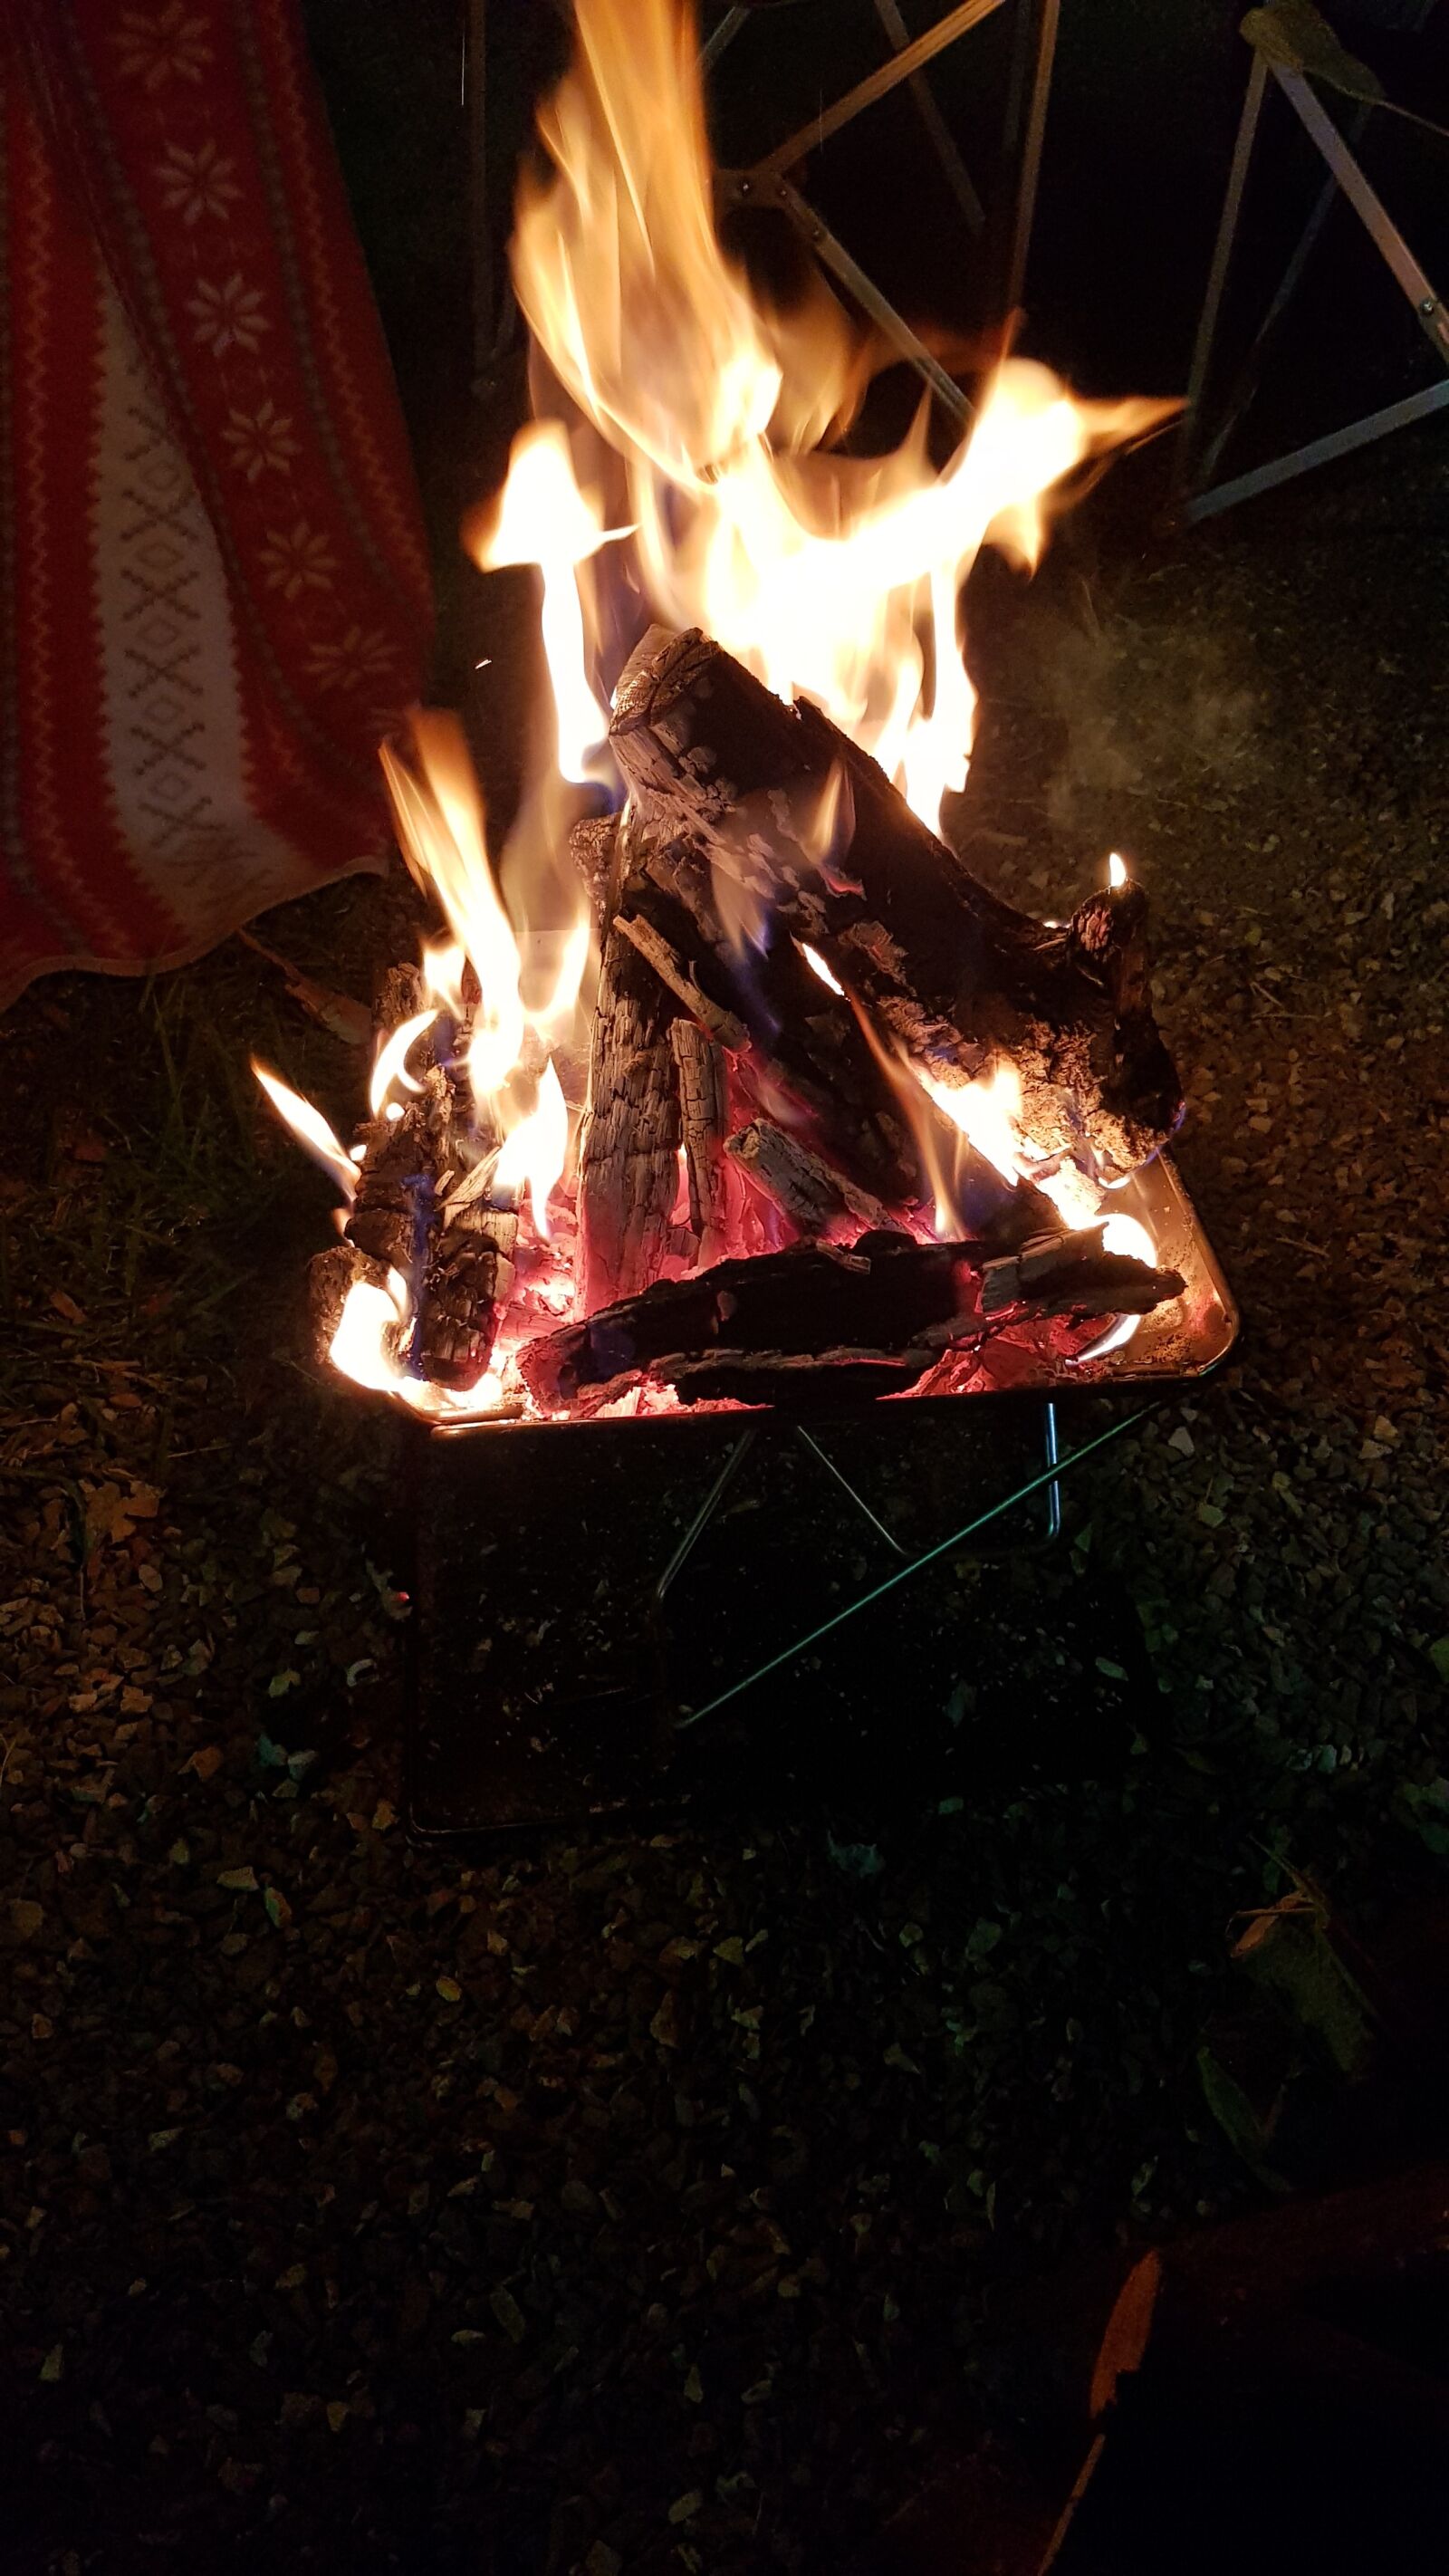 Samsung Galaxy S8 sample photo. Campfire, tent, outdoor photography